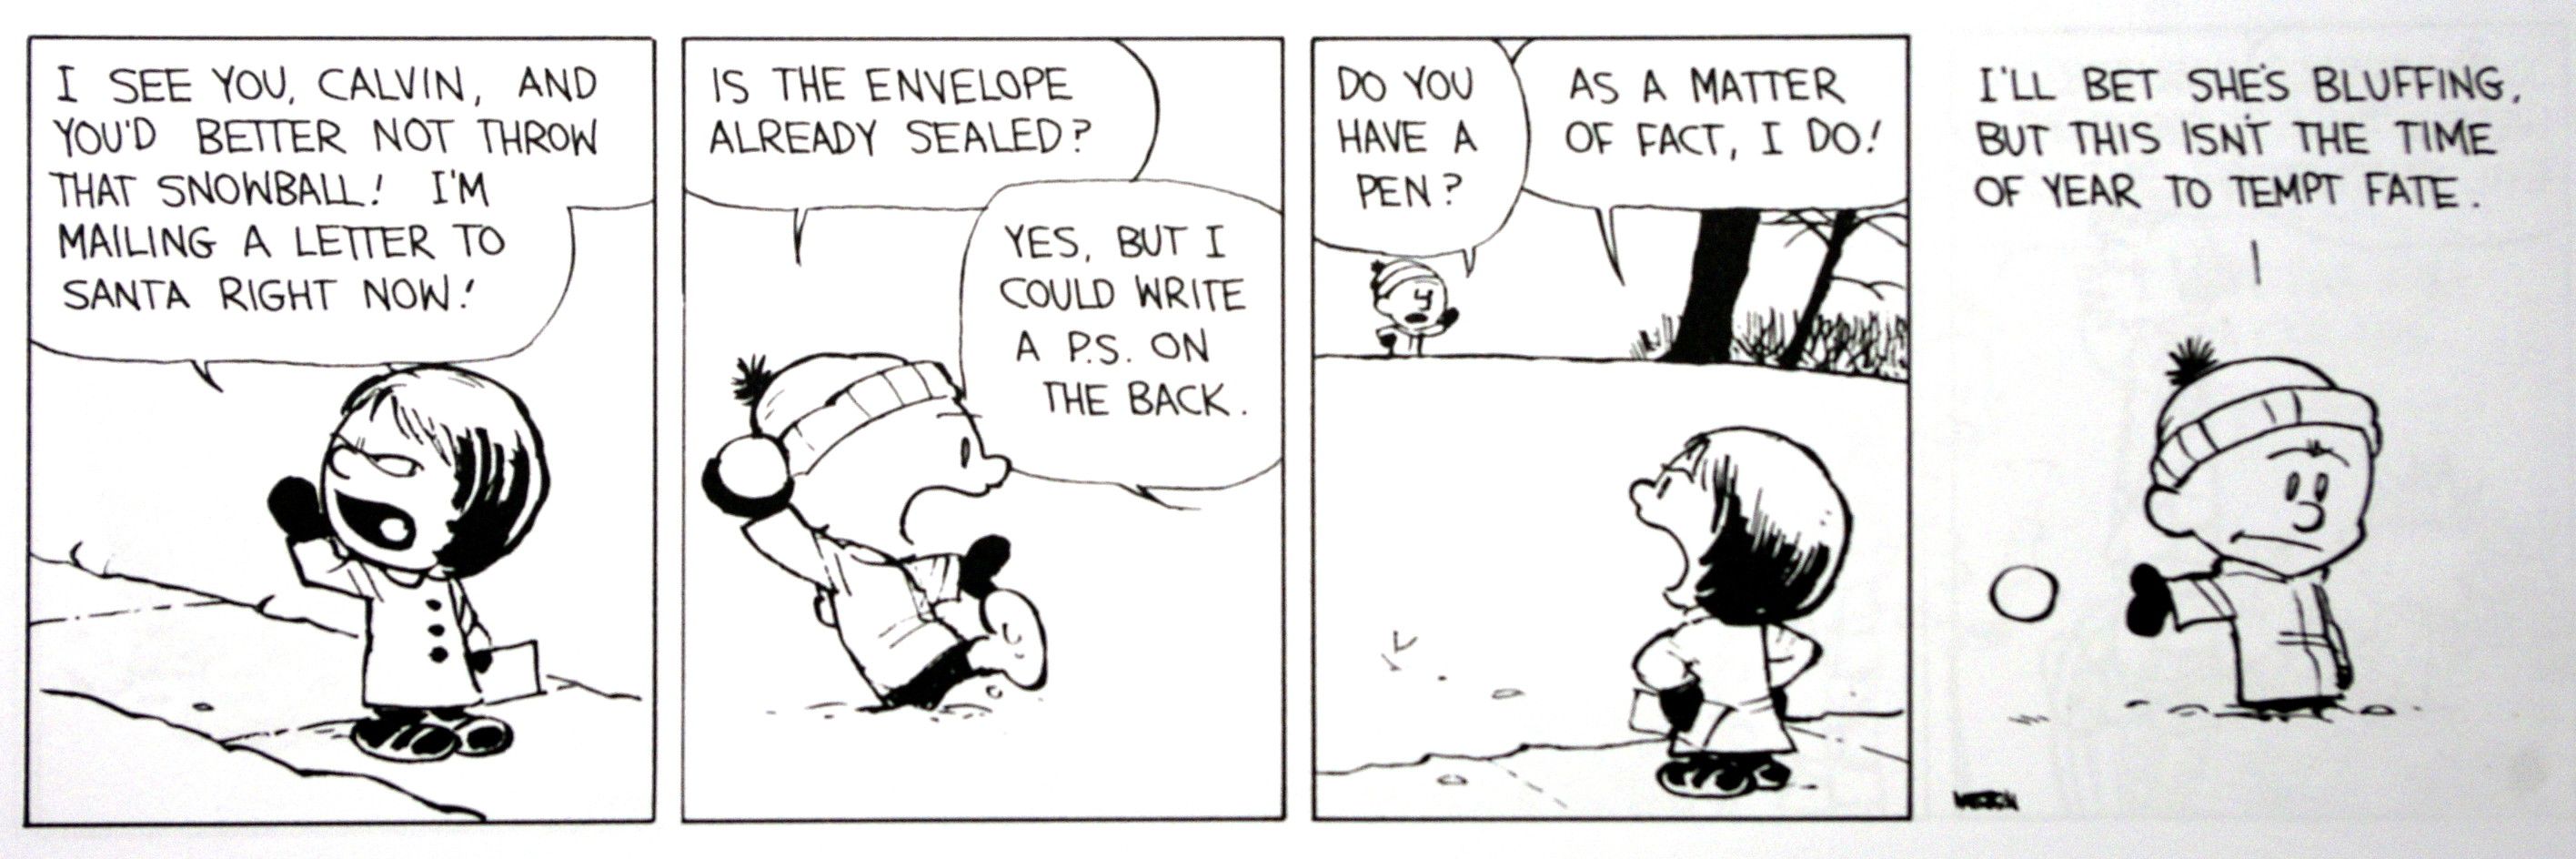 calvin and hobbes strip, Calvin threatens to throw a snowball at Suzy but she convinces him he won't get Christmas presents so he relents. 